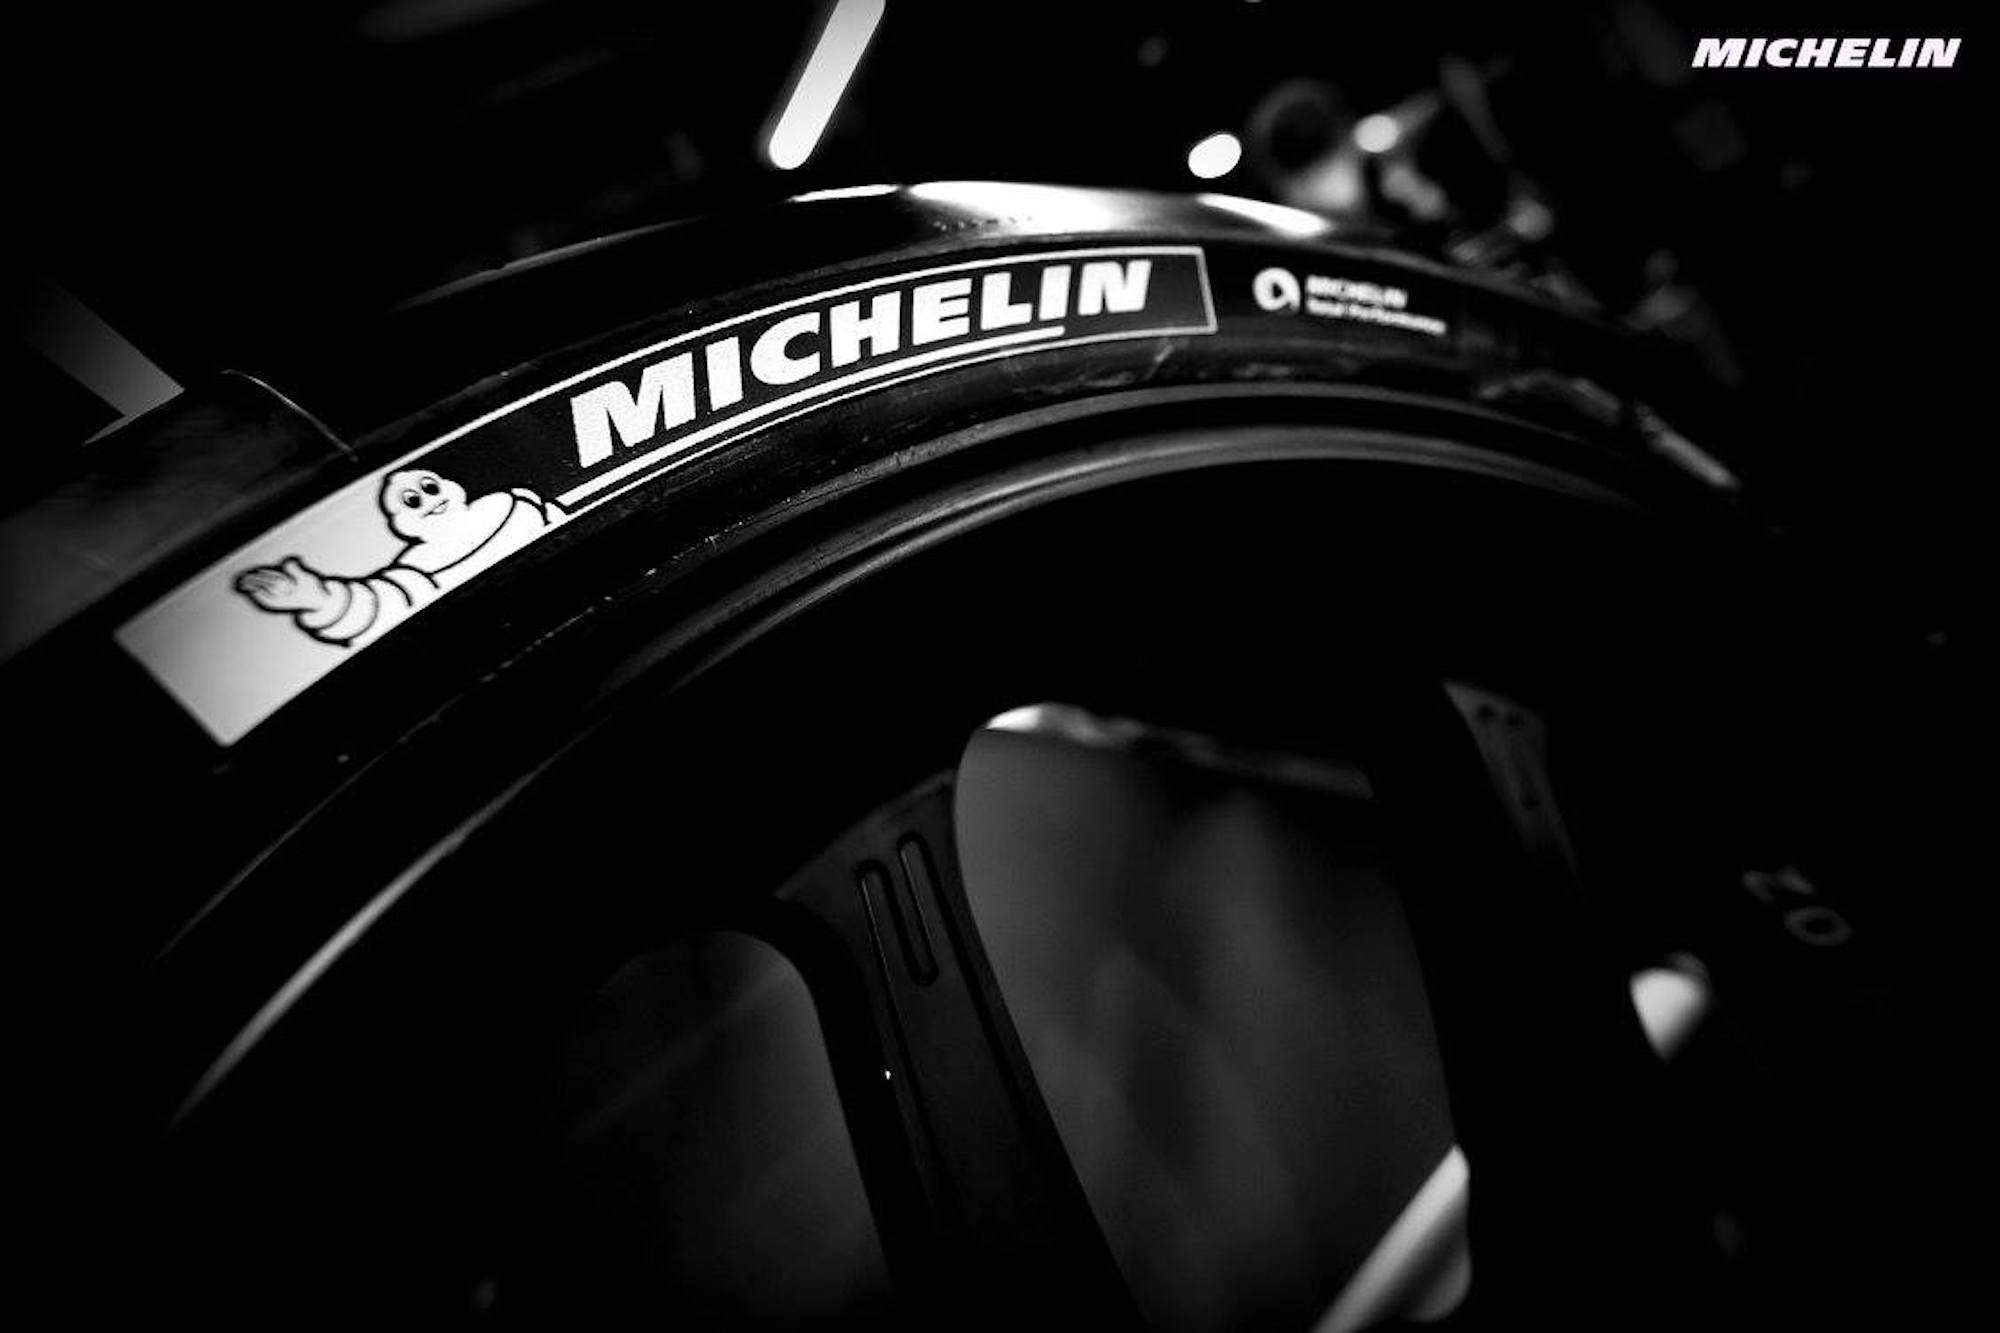 Michelin tyres. Media sourced from Michelin's Facebook page for motorcycle tyres. 